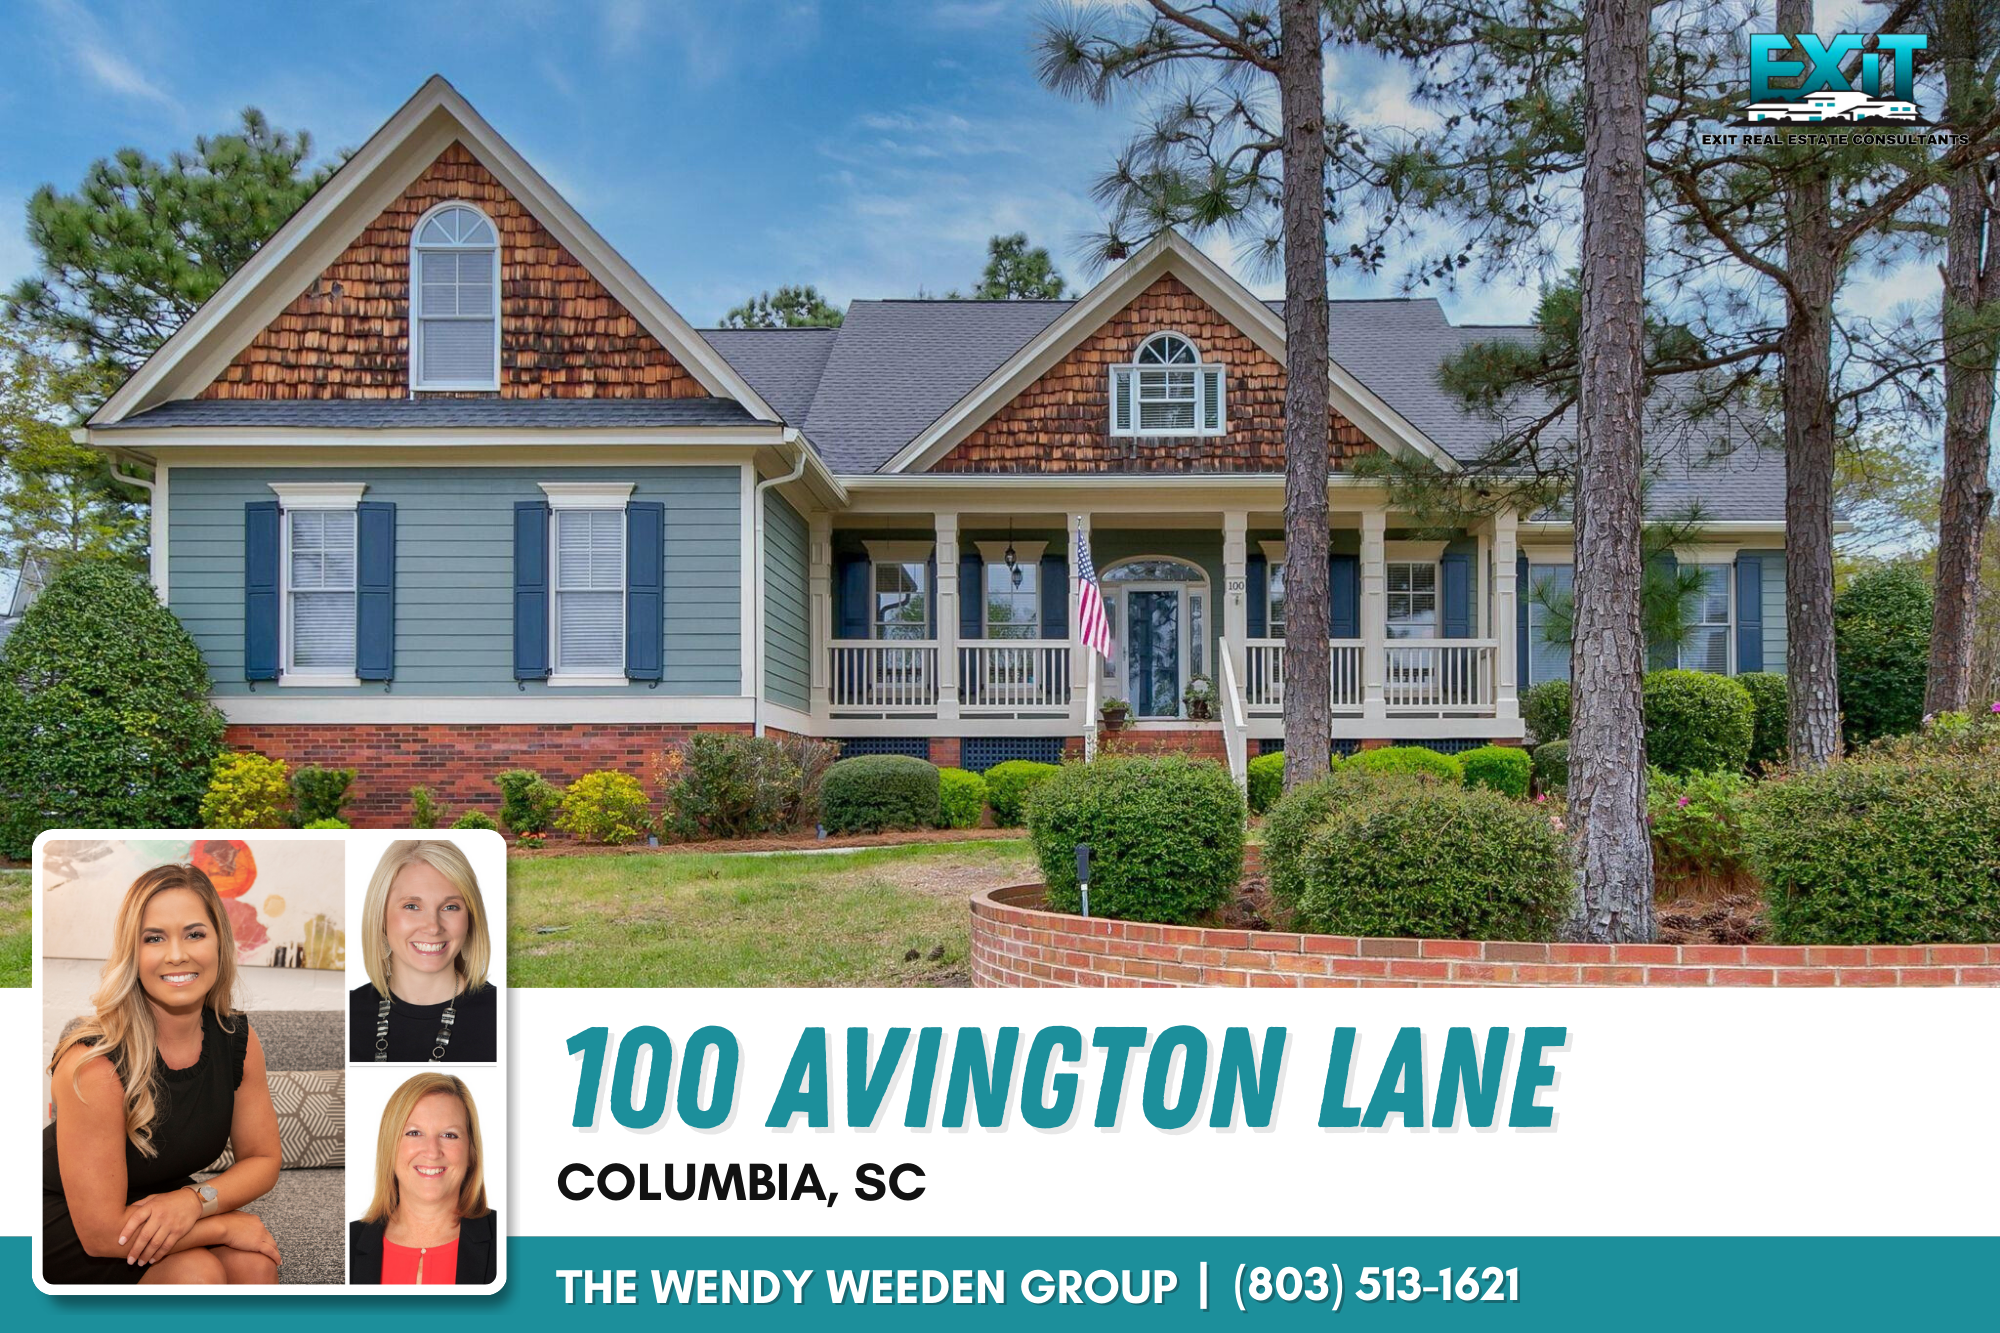 Just listed in Manchester Park/Lake Carolina - Columbia